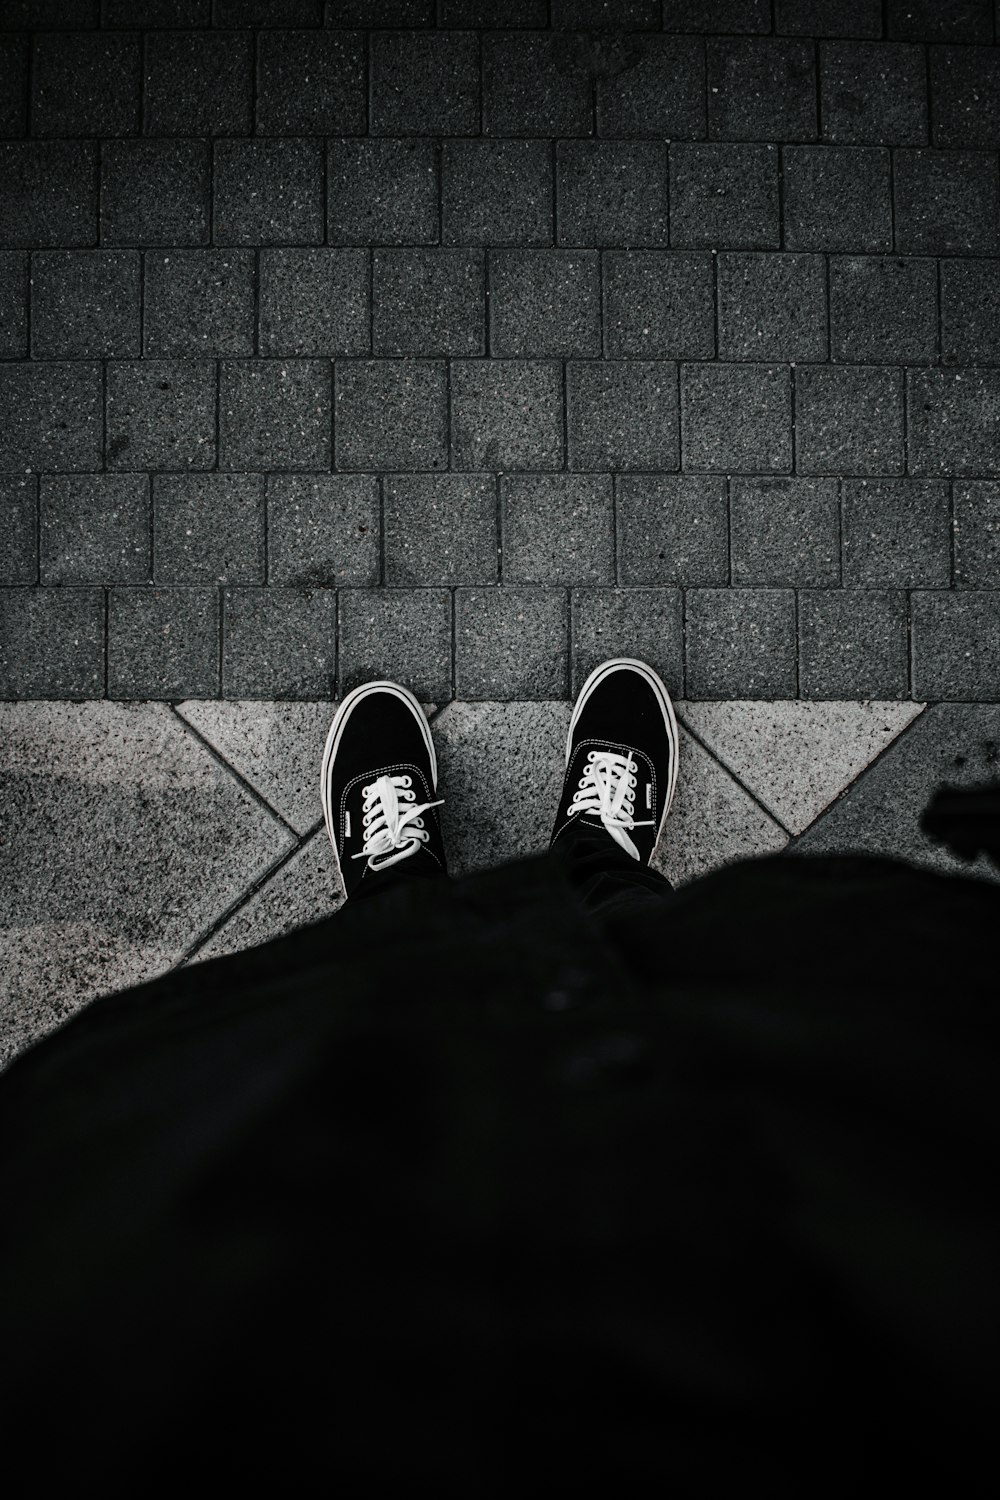 person in black pants wearing black and white sneakers